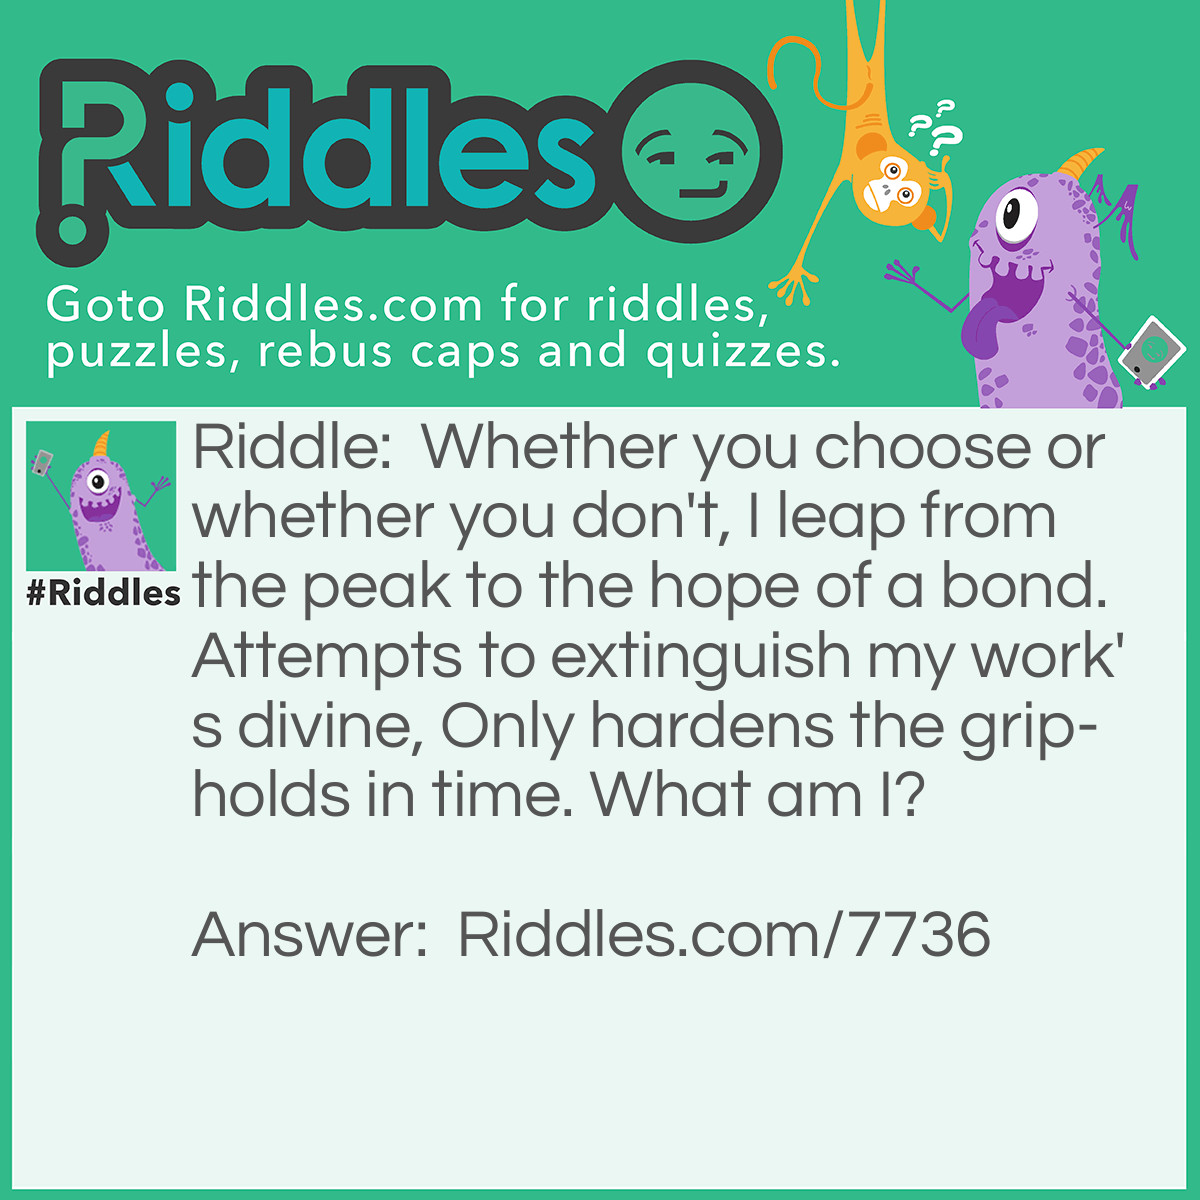 Riddle: Whether you choose or whether you don't, I leap from the peak to the hope of a bond. Attempts to extinguish my work's divine, Only hardens the grip-holds in time. What am I? Answer: Love.